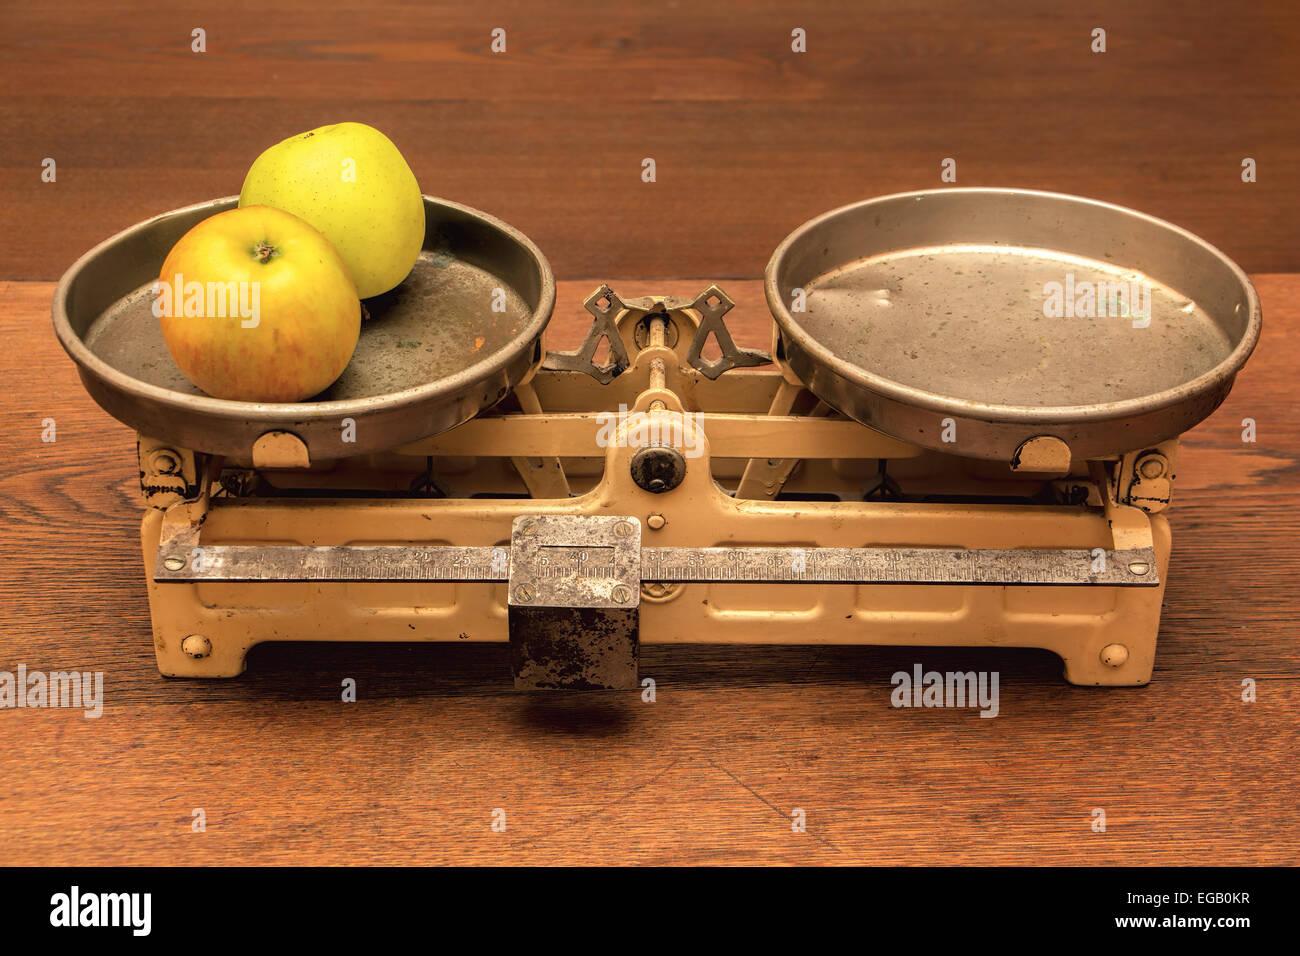 Vintage kitchen scales on wooden table. Stock Photo